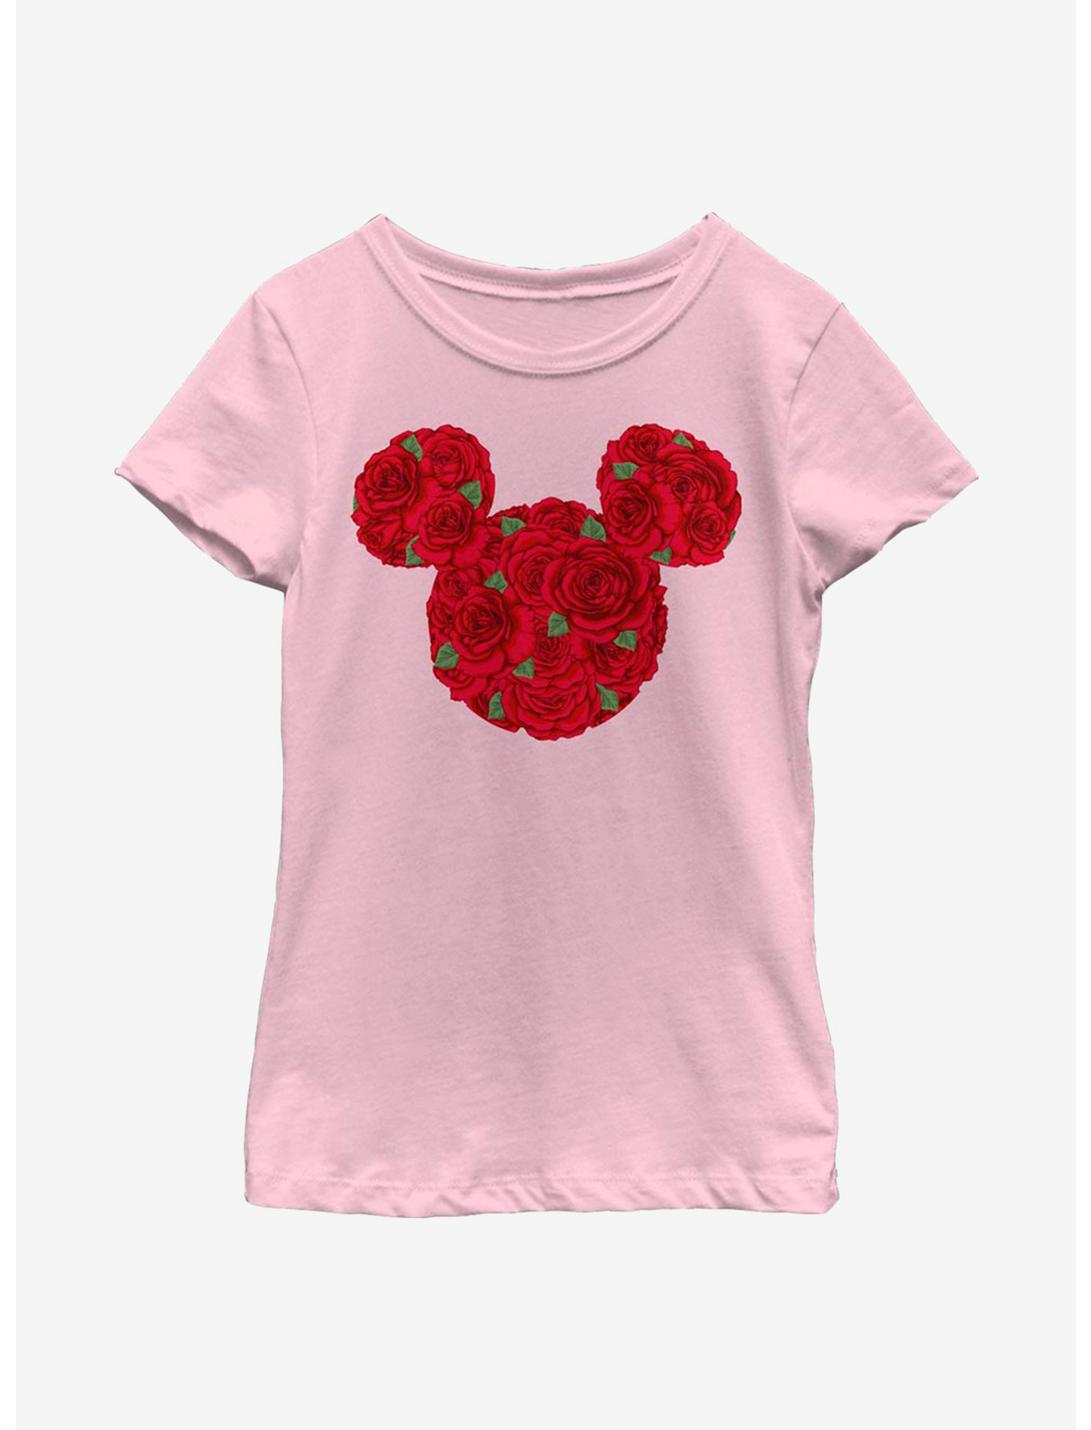 Disney Minnie Mouse Mickey Mouse Roses Youth Girls T-Shirt, PINK, hi-res